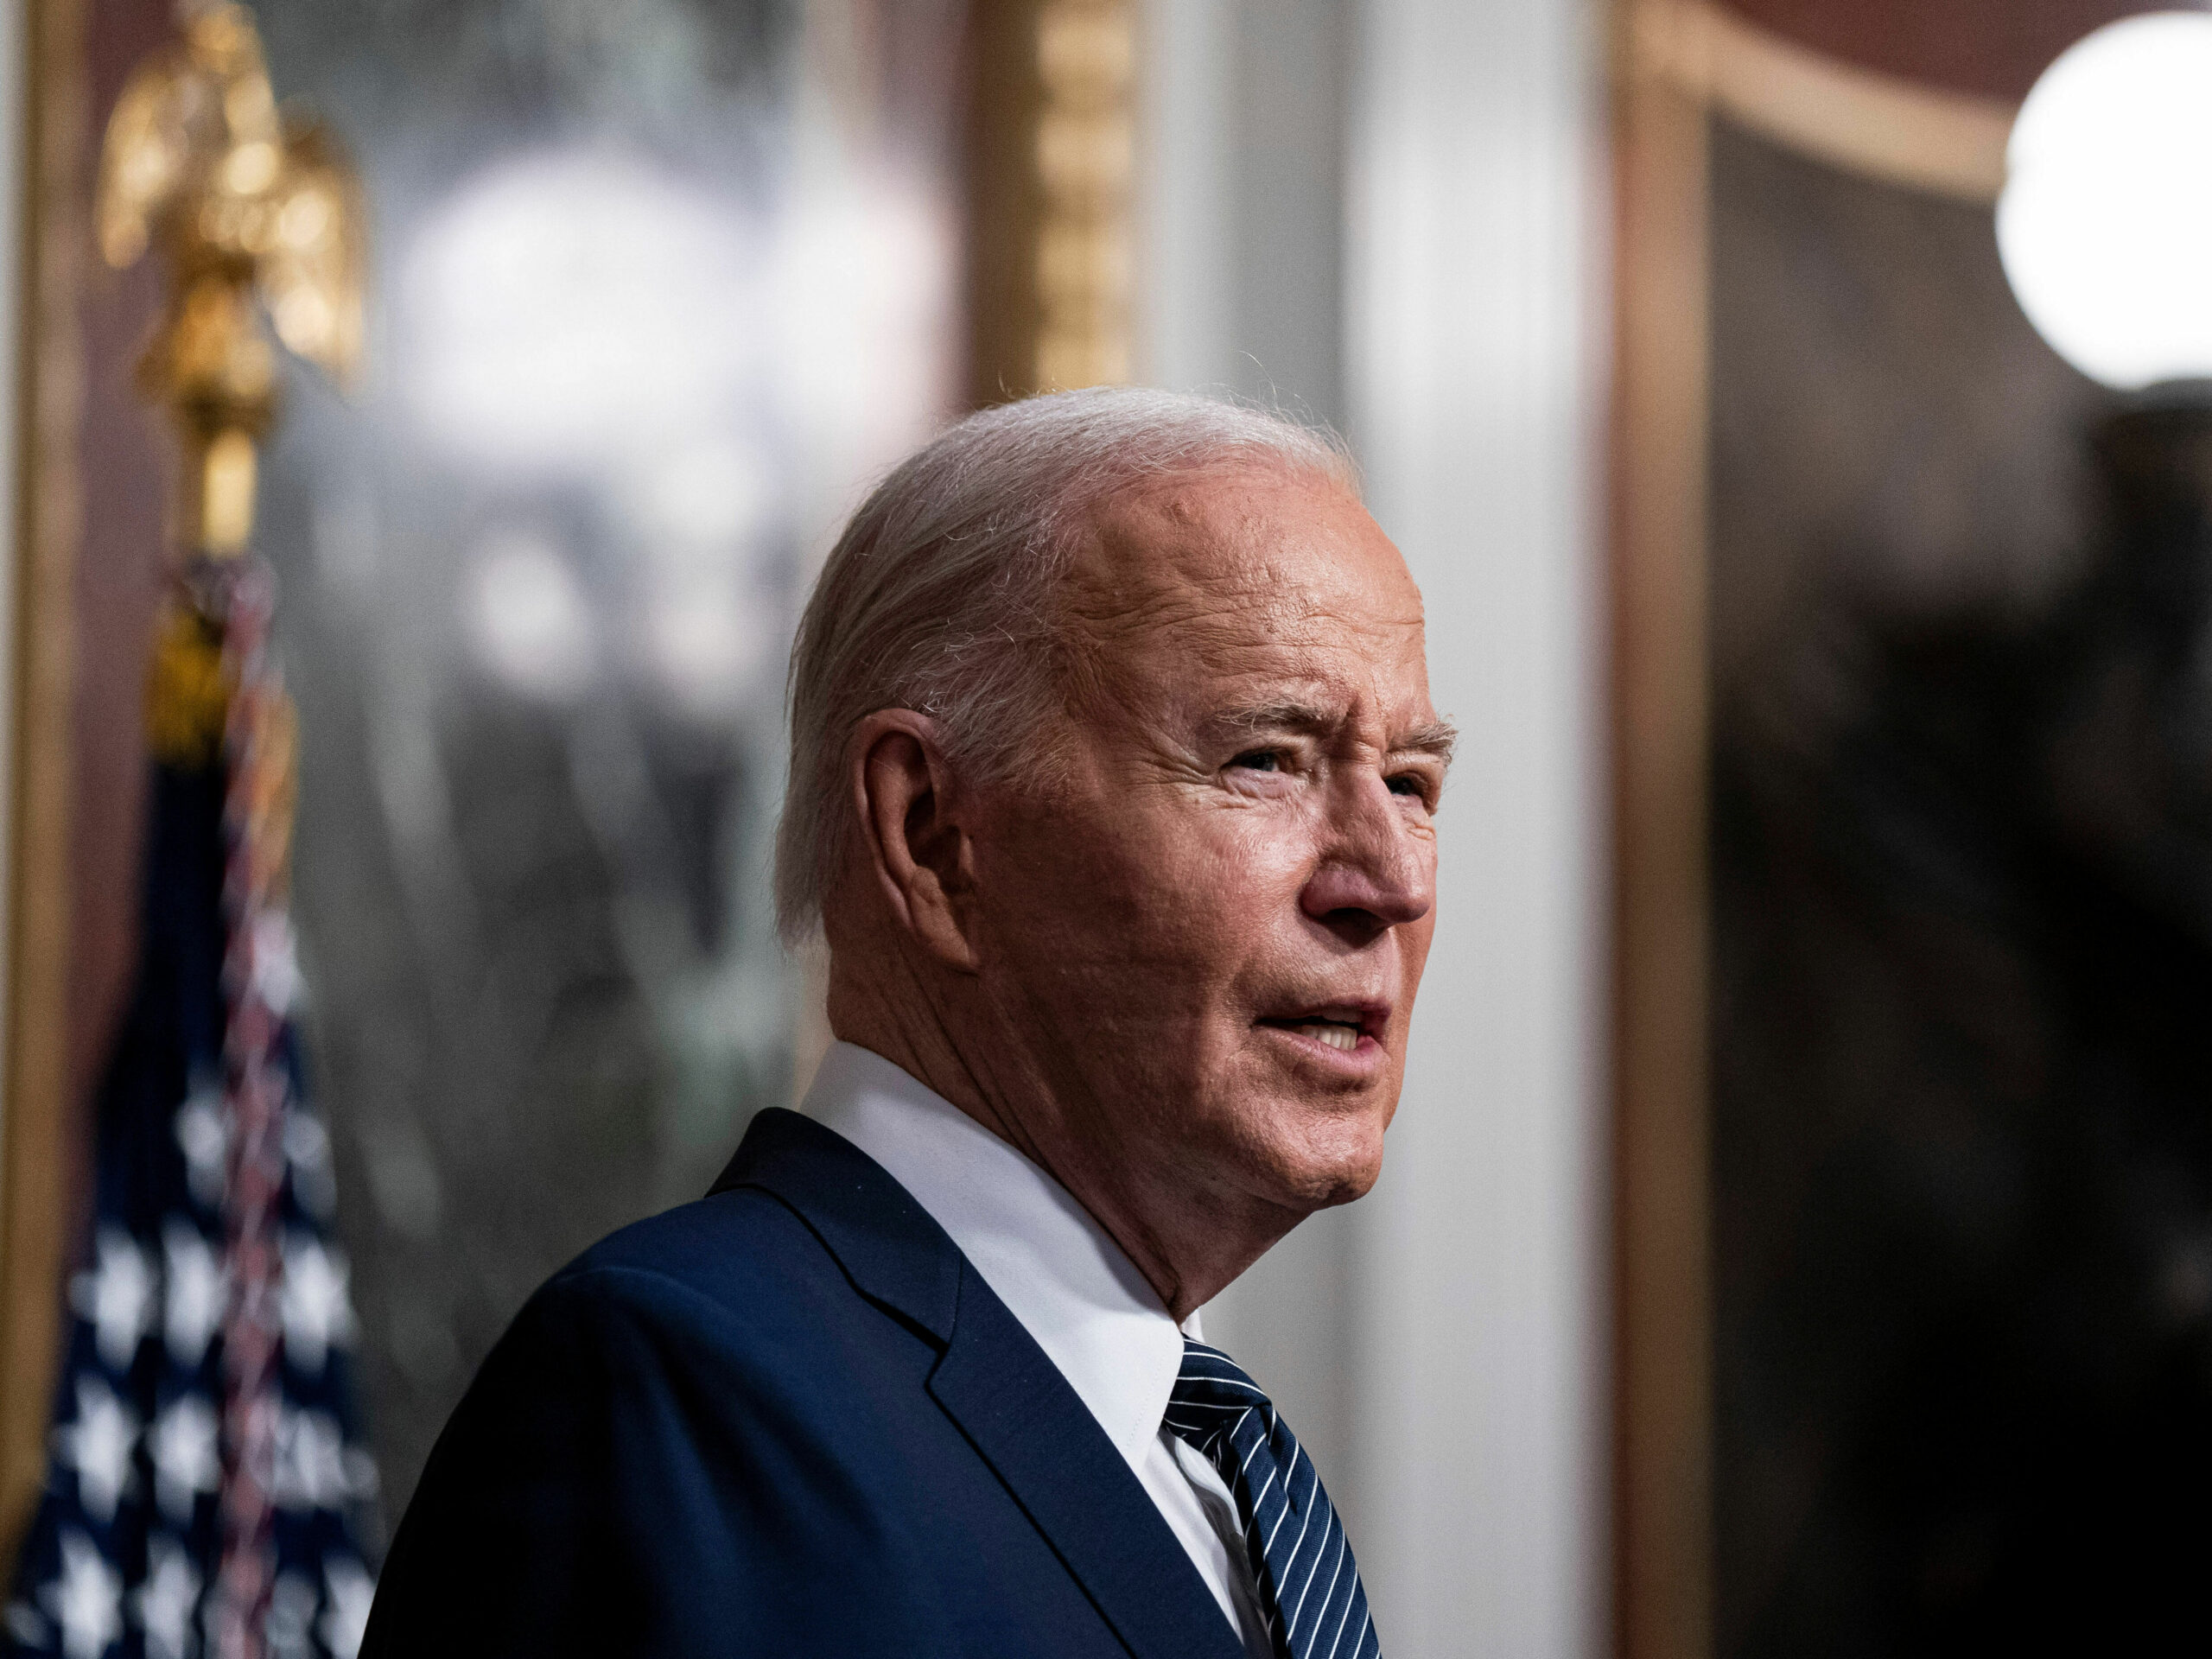 Biden warns Netanyahu that U.S. policy on Gaza hinges on improved conditions there